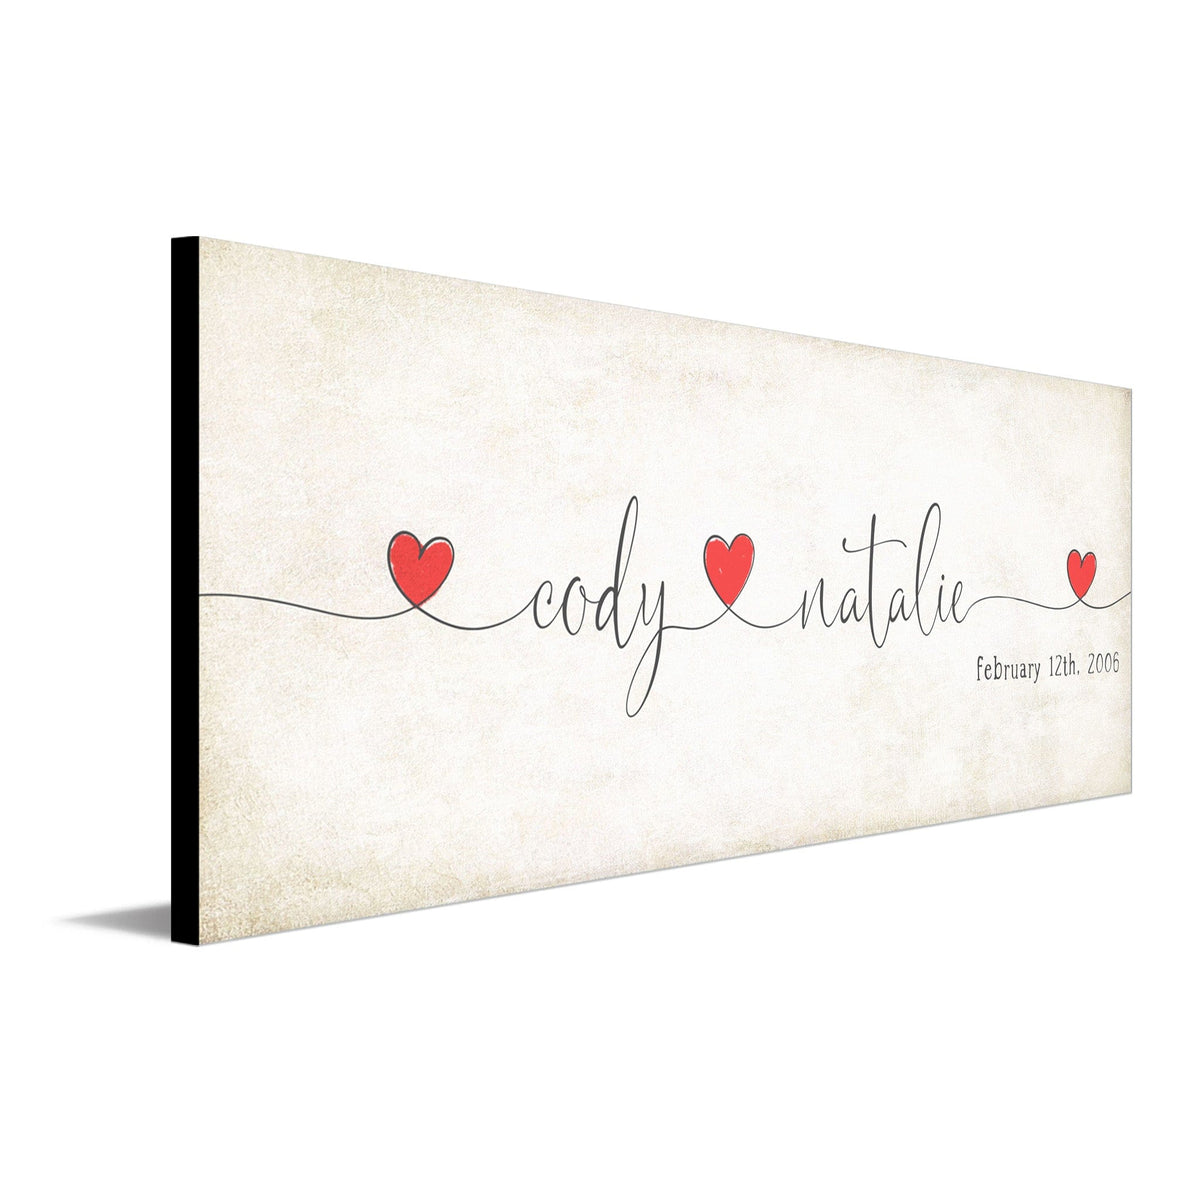 Romantic personalized gift with names and date in the art